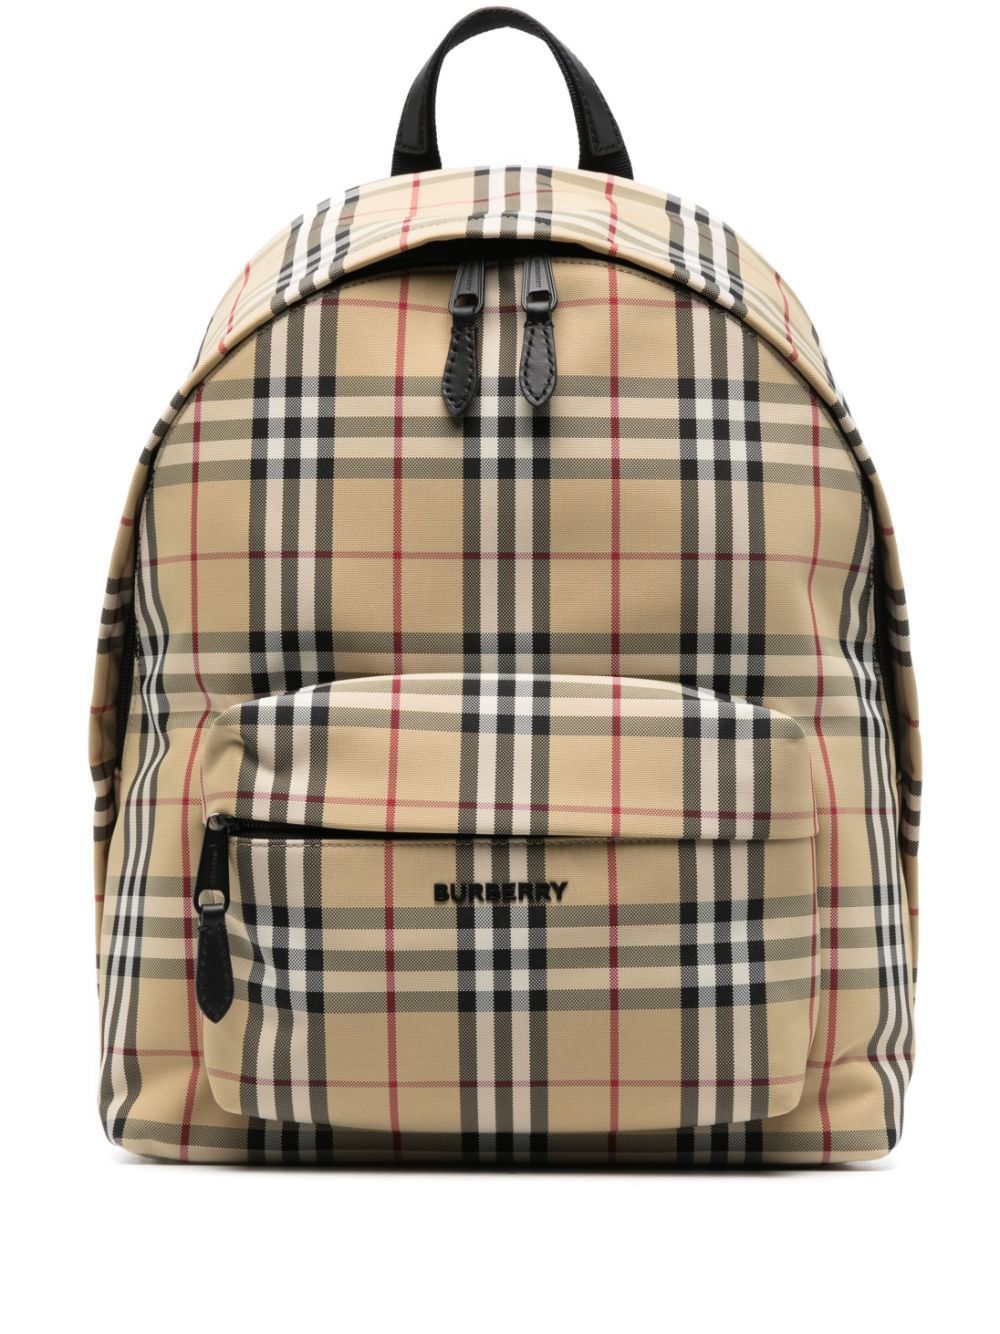 BURBERRY Plaid and Practical Backpack for the Fashion-Forward Woman